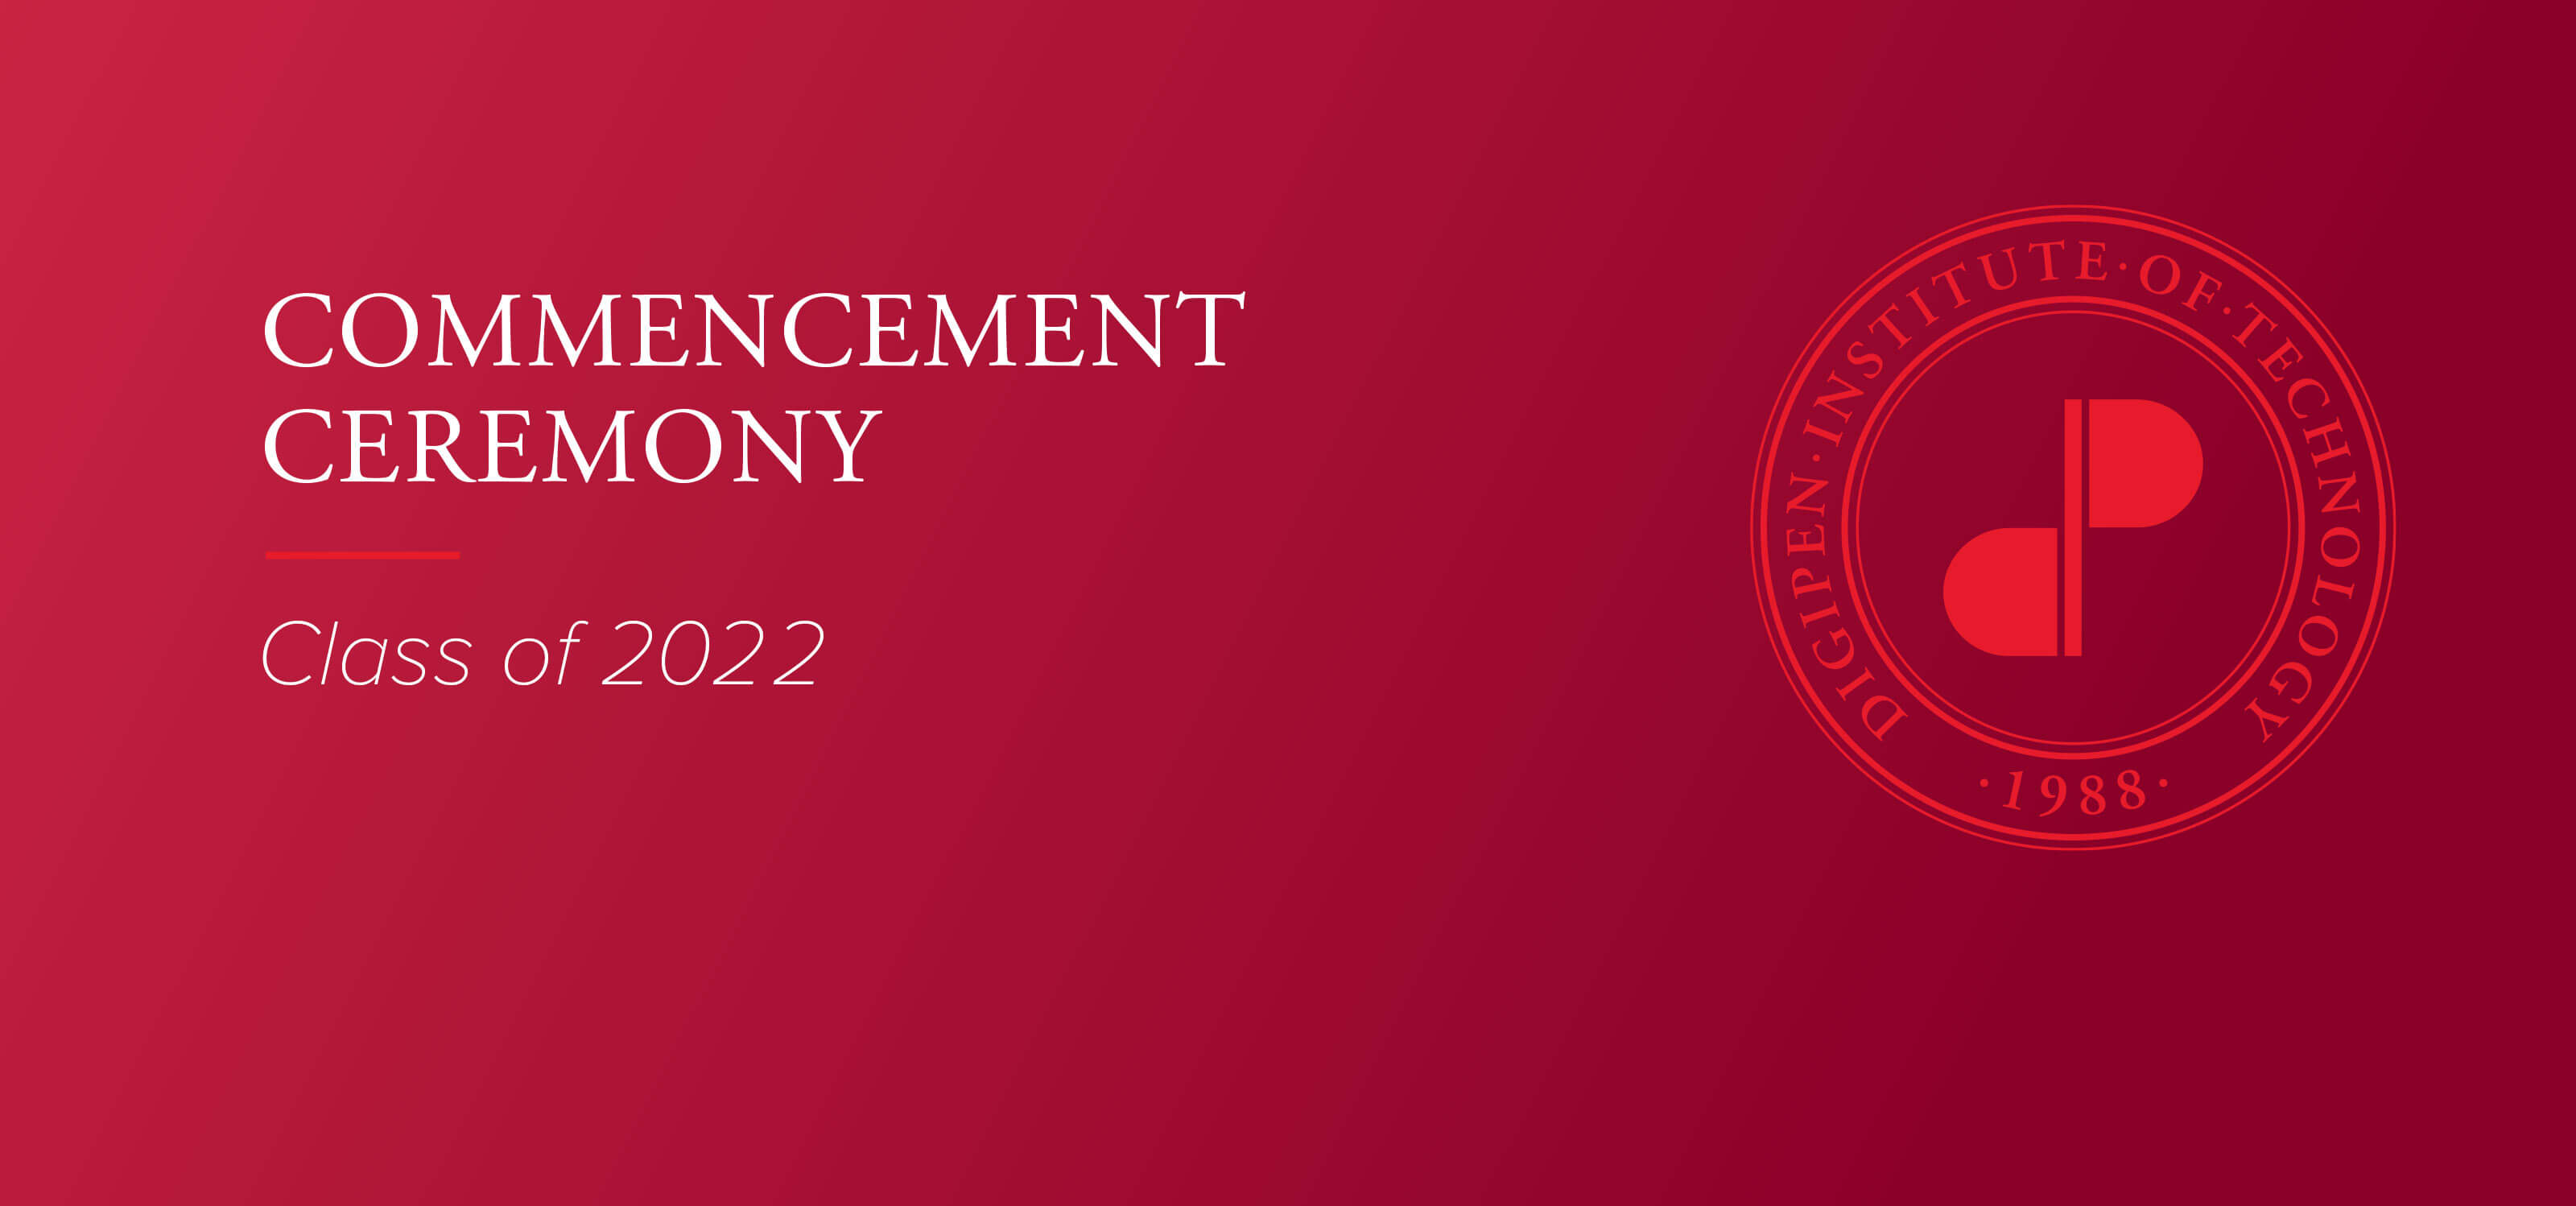 2022 Commencement banner with DigiPen logo